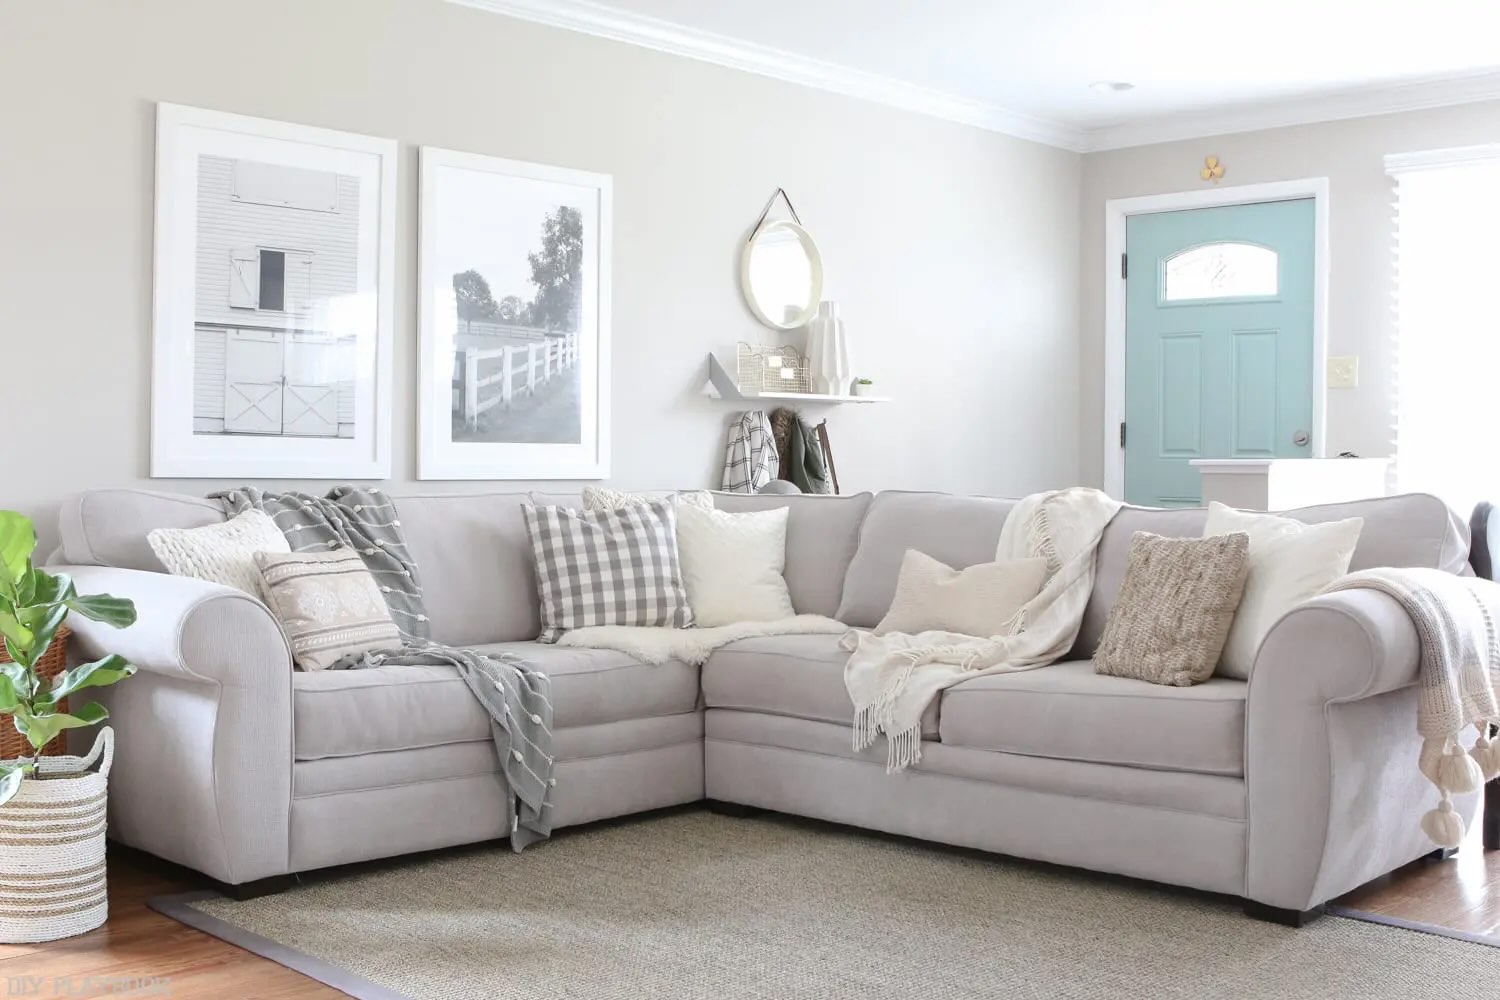 Living Room Throw Pillows For Grey Couch